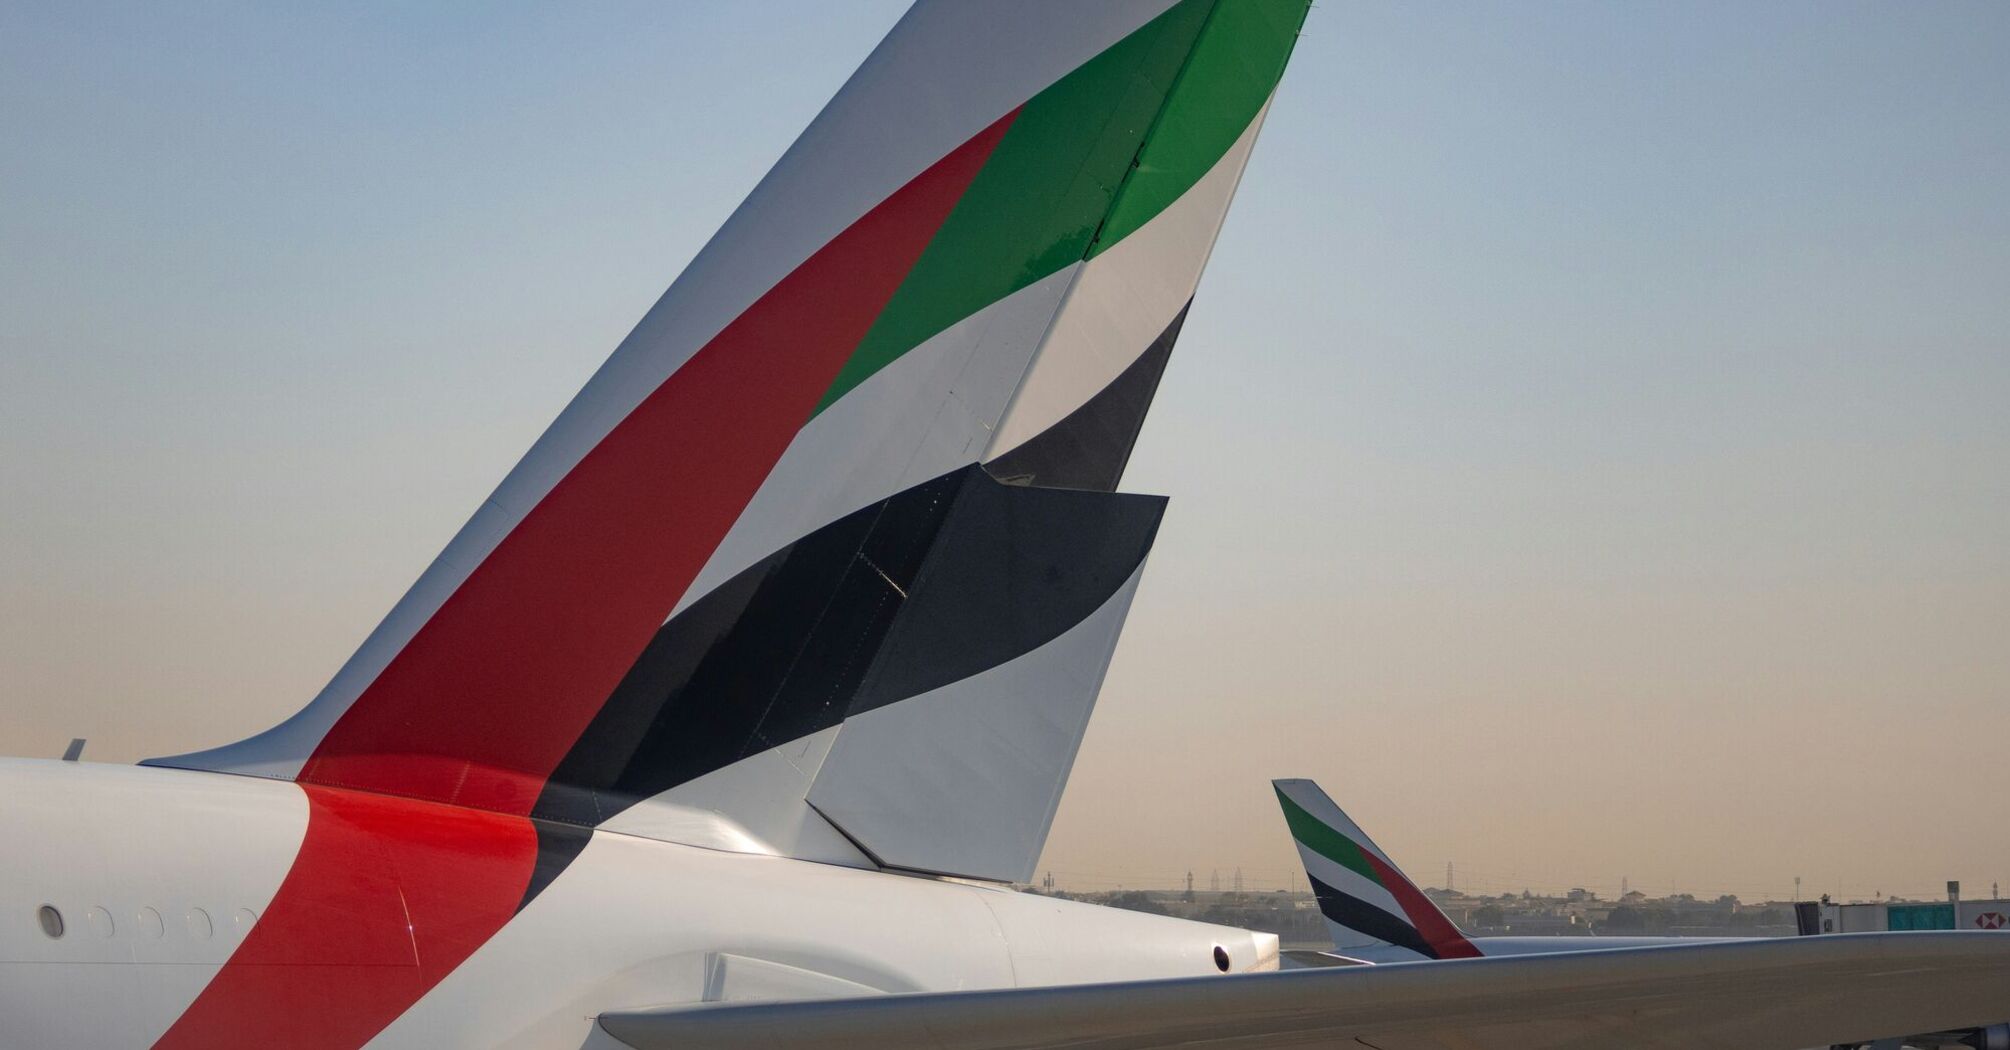 Tail fins of Emirates aircraft featuring the iconic UAE flag colors on a tarmac during sunset 